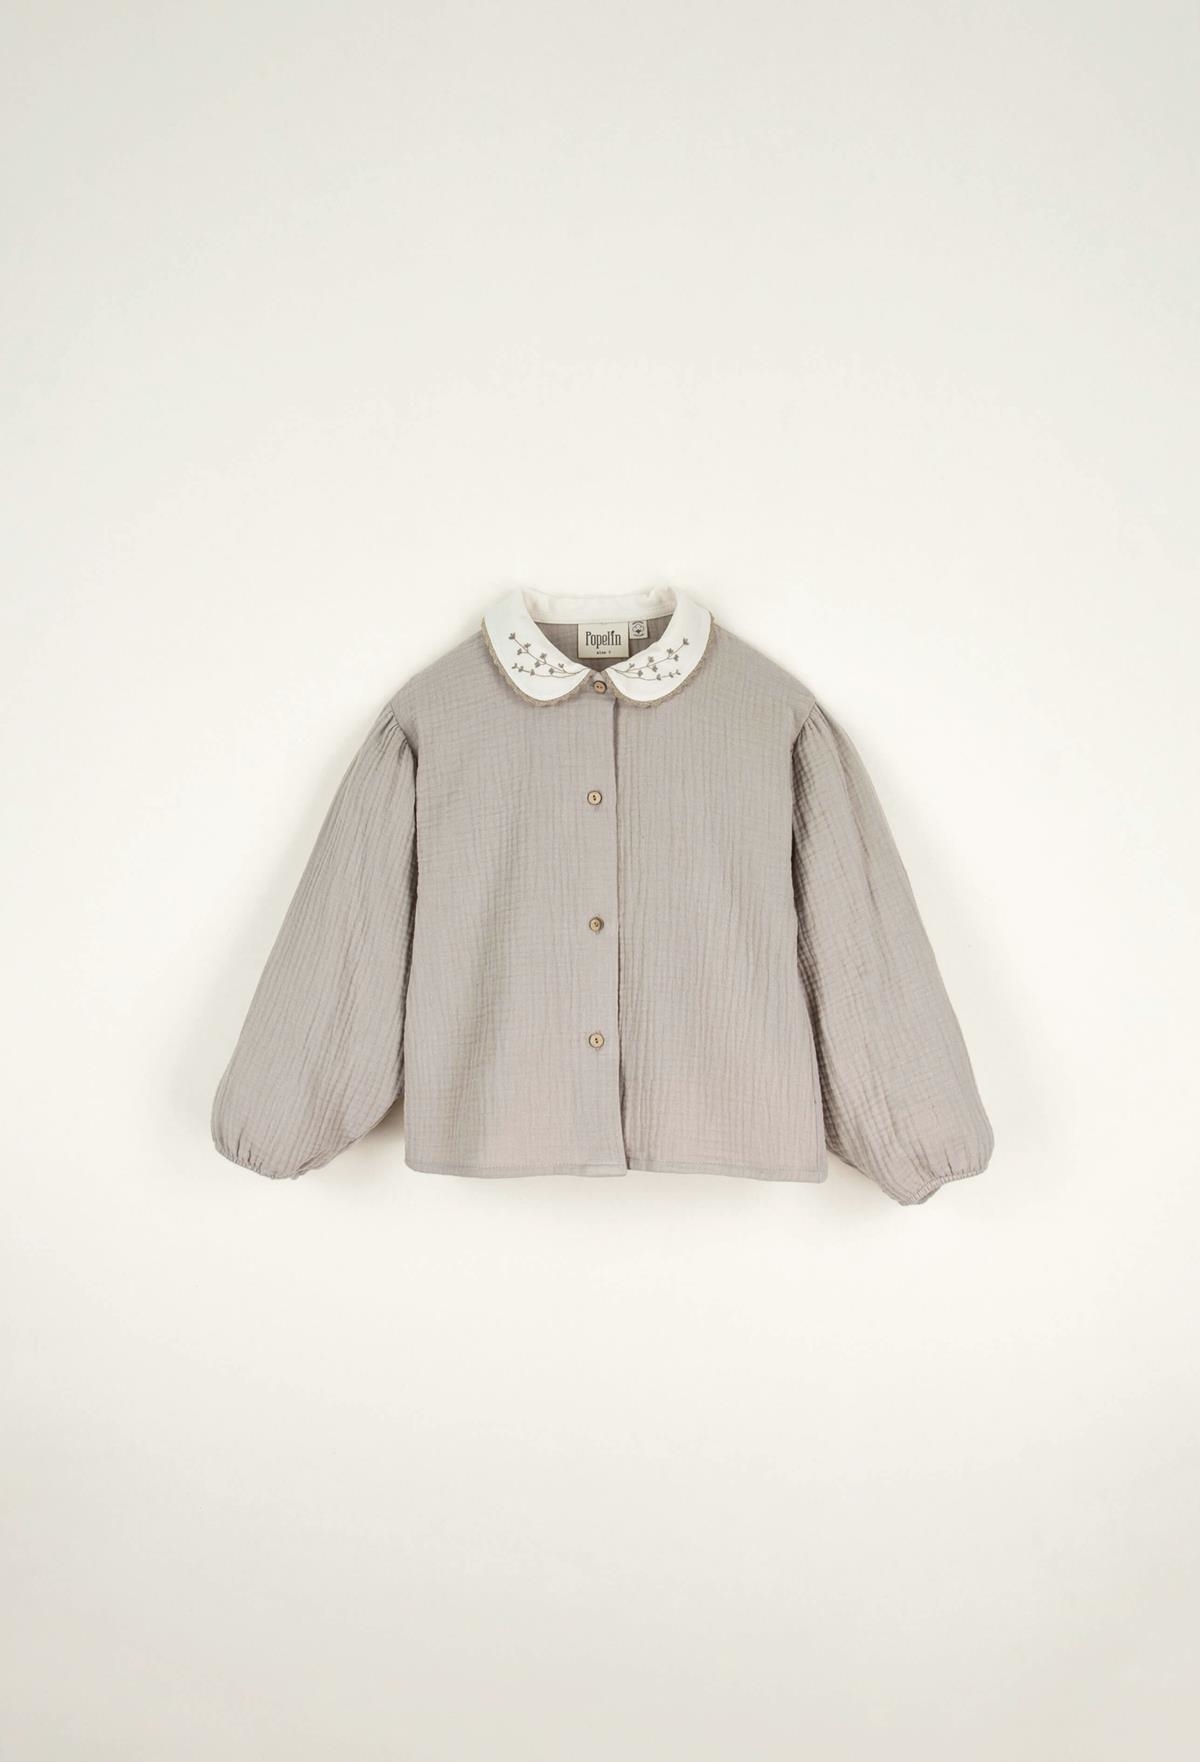 Mod.13.3 Taupe blouse with embroidered collar | AW22.23 Mod.13.3 Taupe blouse with embroidered collar